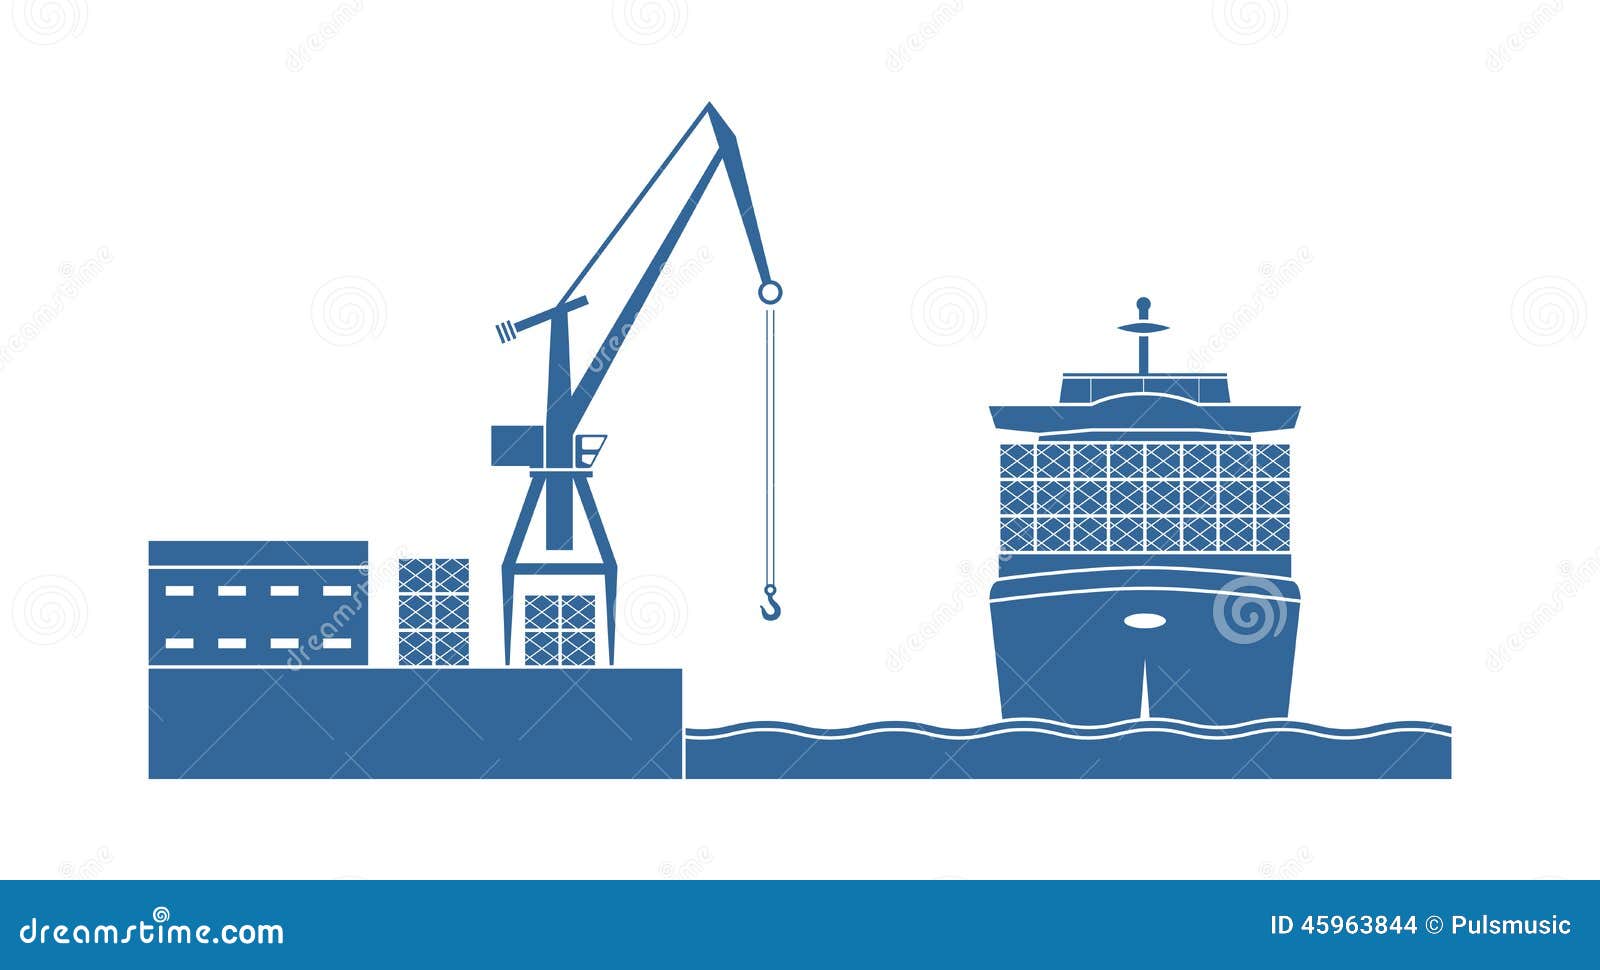 clipart container vessel - photo #25